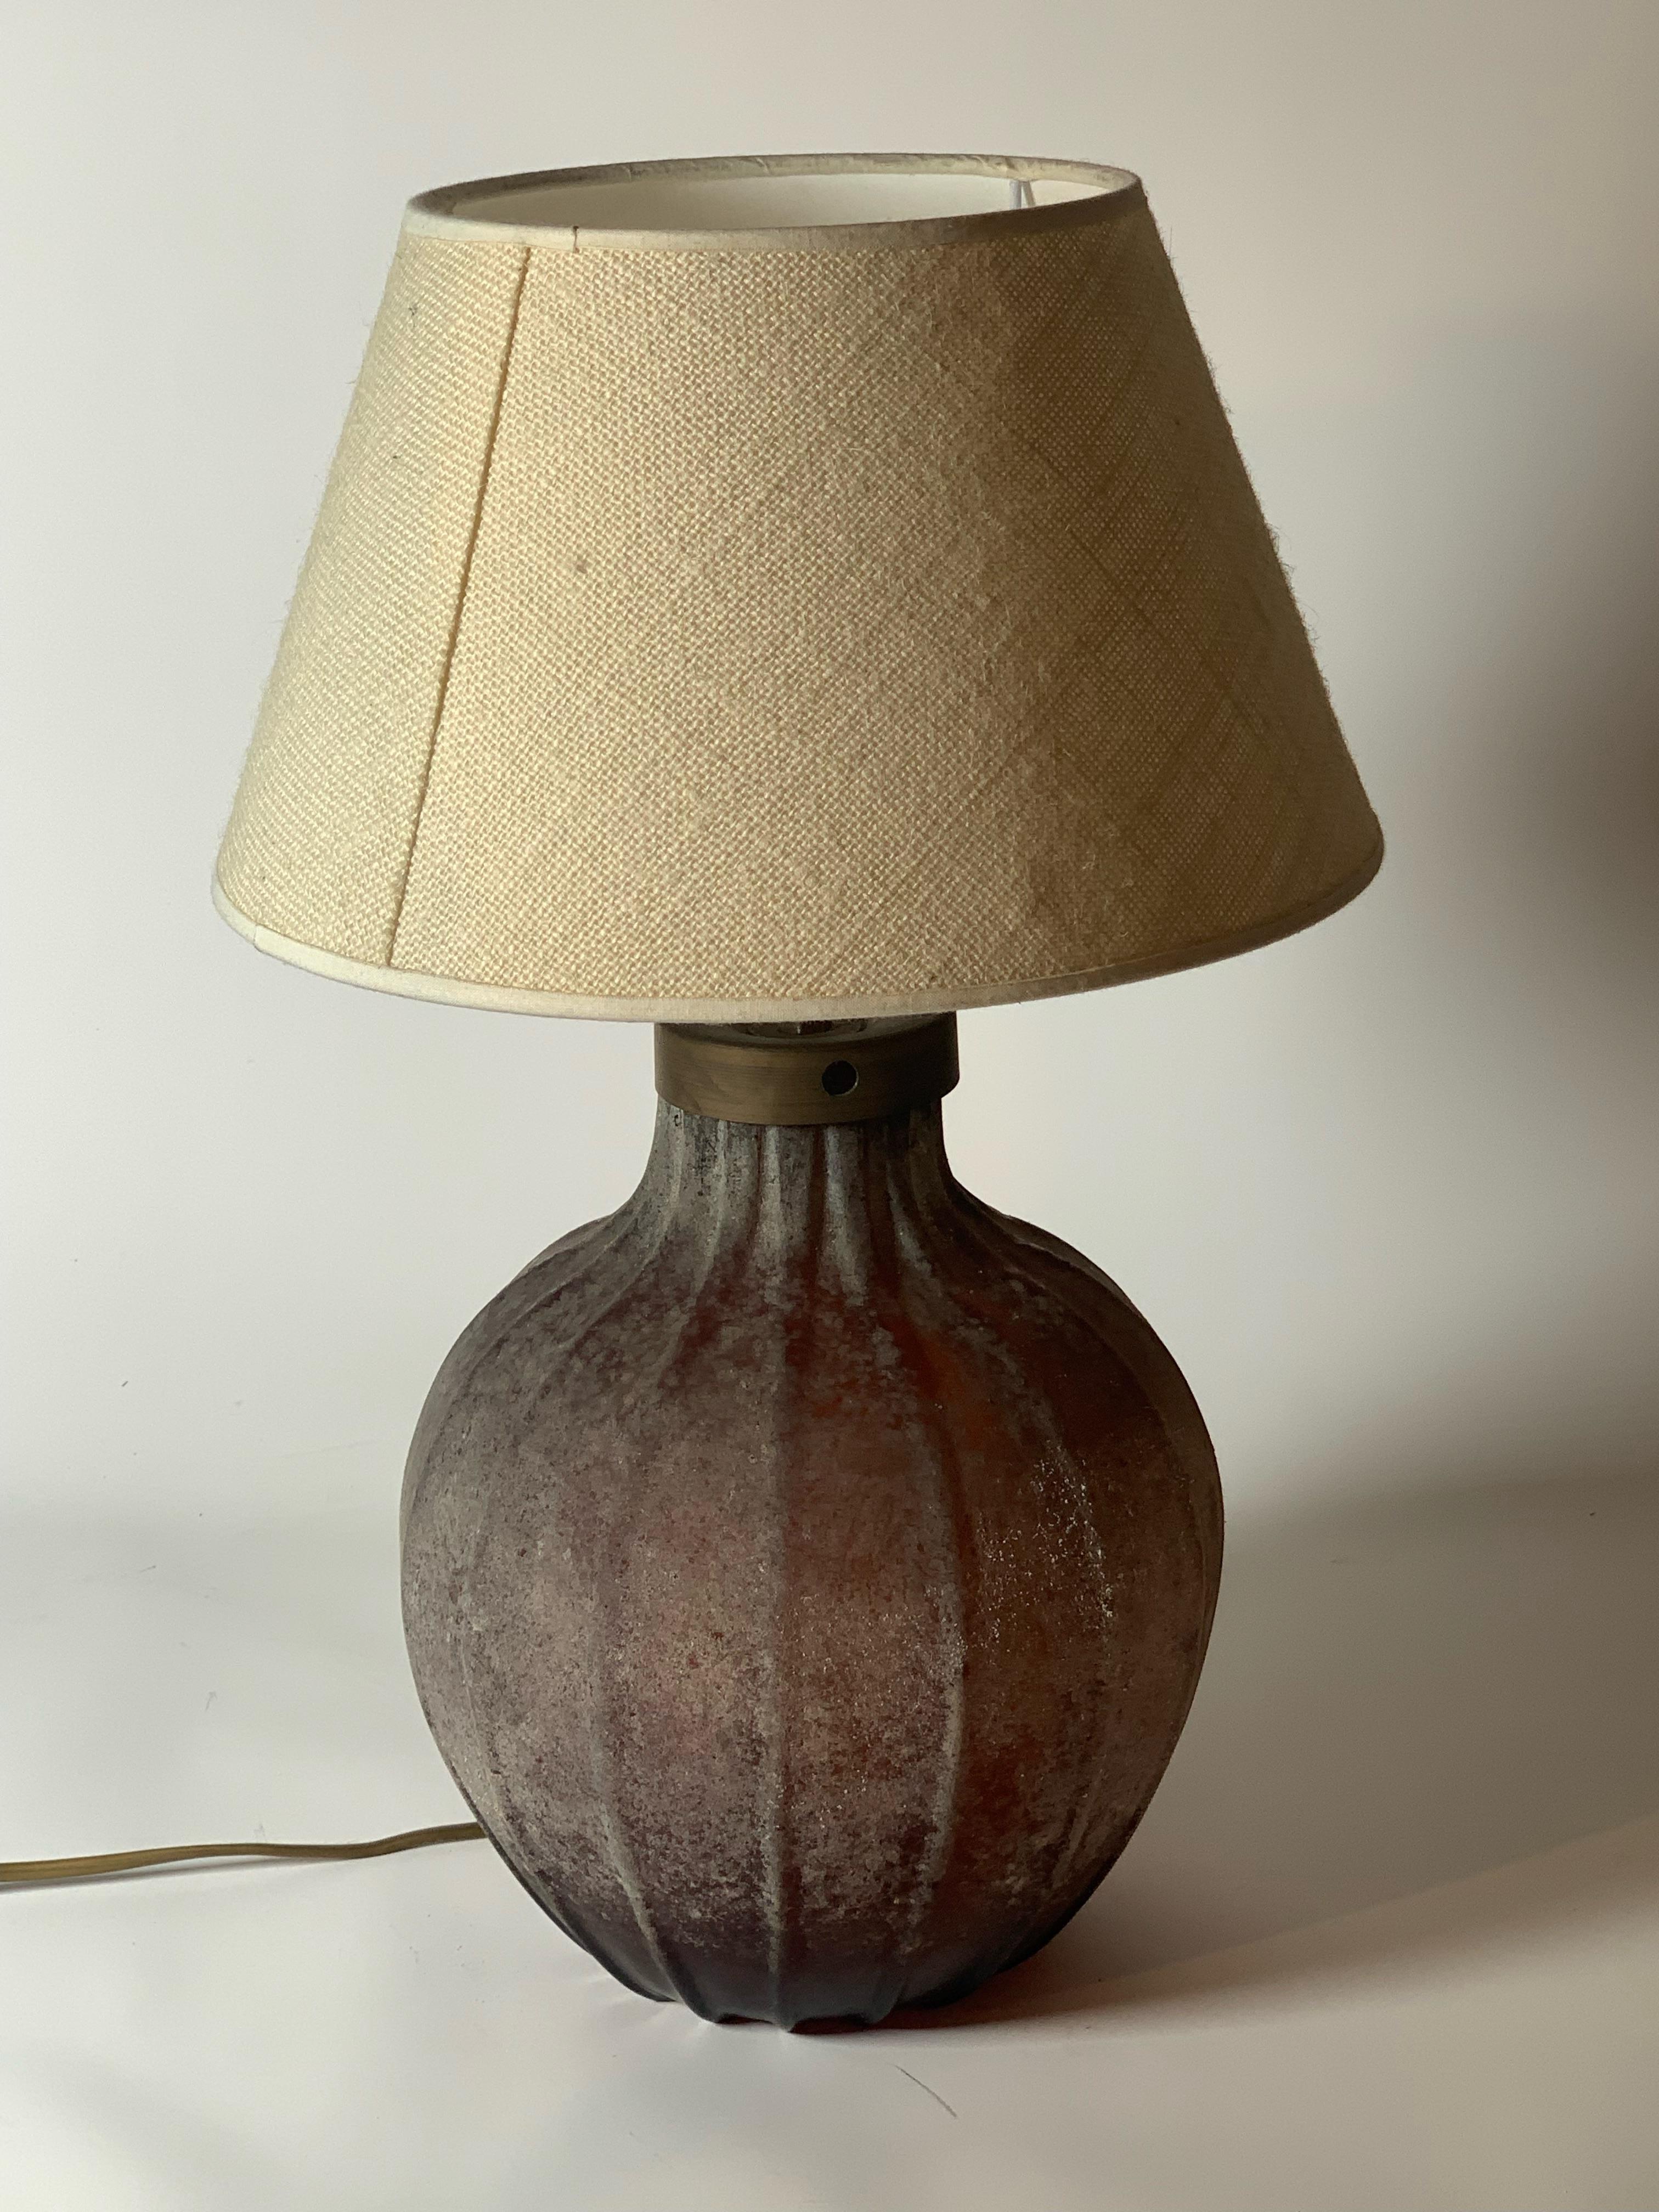 Seguso Vetri d' Arte table lamp from the 1950s.
Amber-coloured Scavo Murano glass.
 
Biography
Seguso Vetri d'Arte In 1933 a group of master glassmakers who had left Barovier & Co. decided to open their own glass factory, starting the Artistica